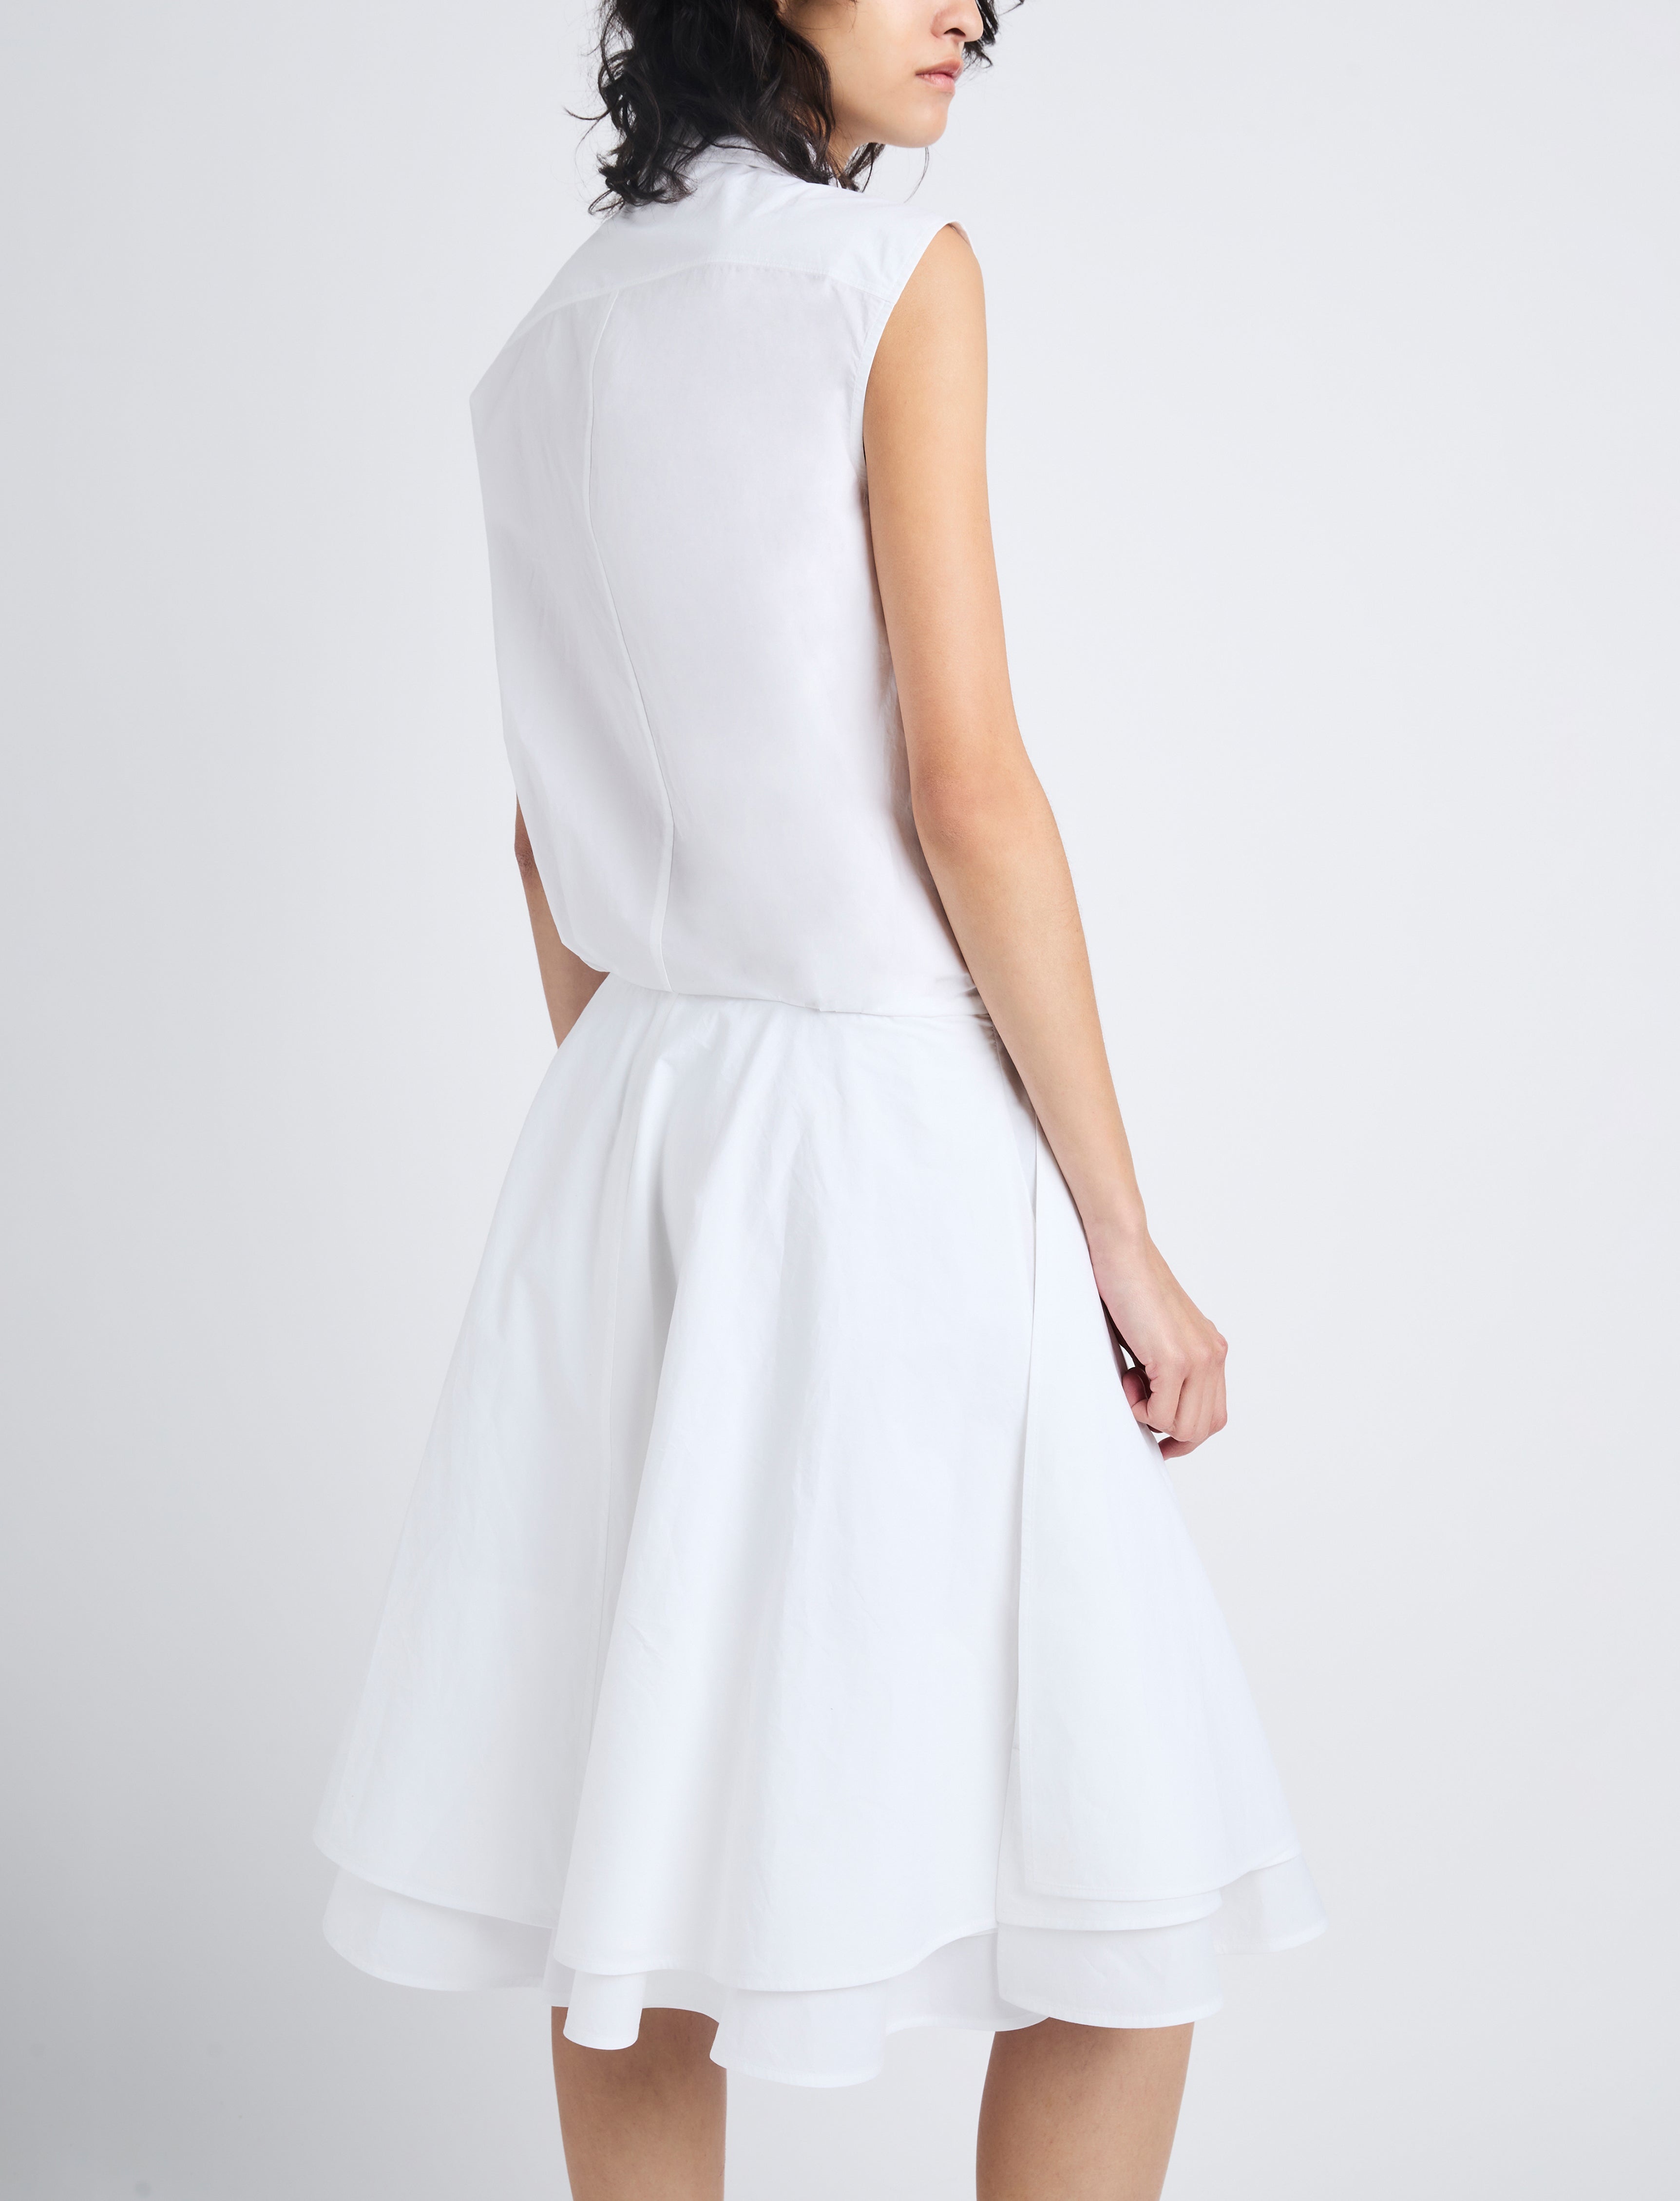 Cindy Dress in Washed Cotton Poplin - 5